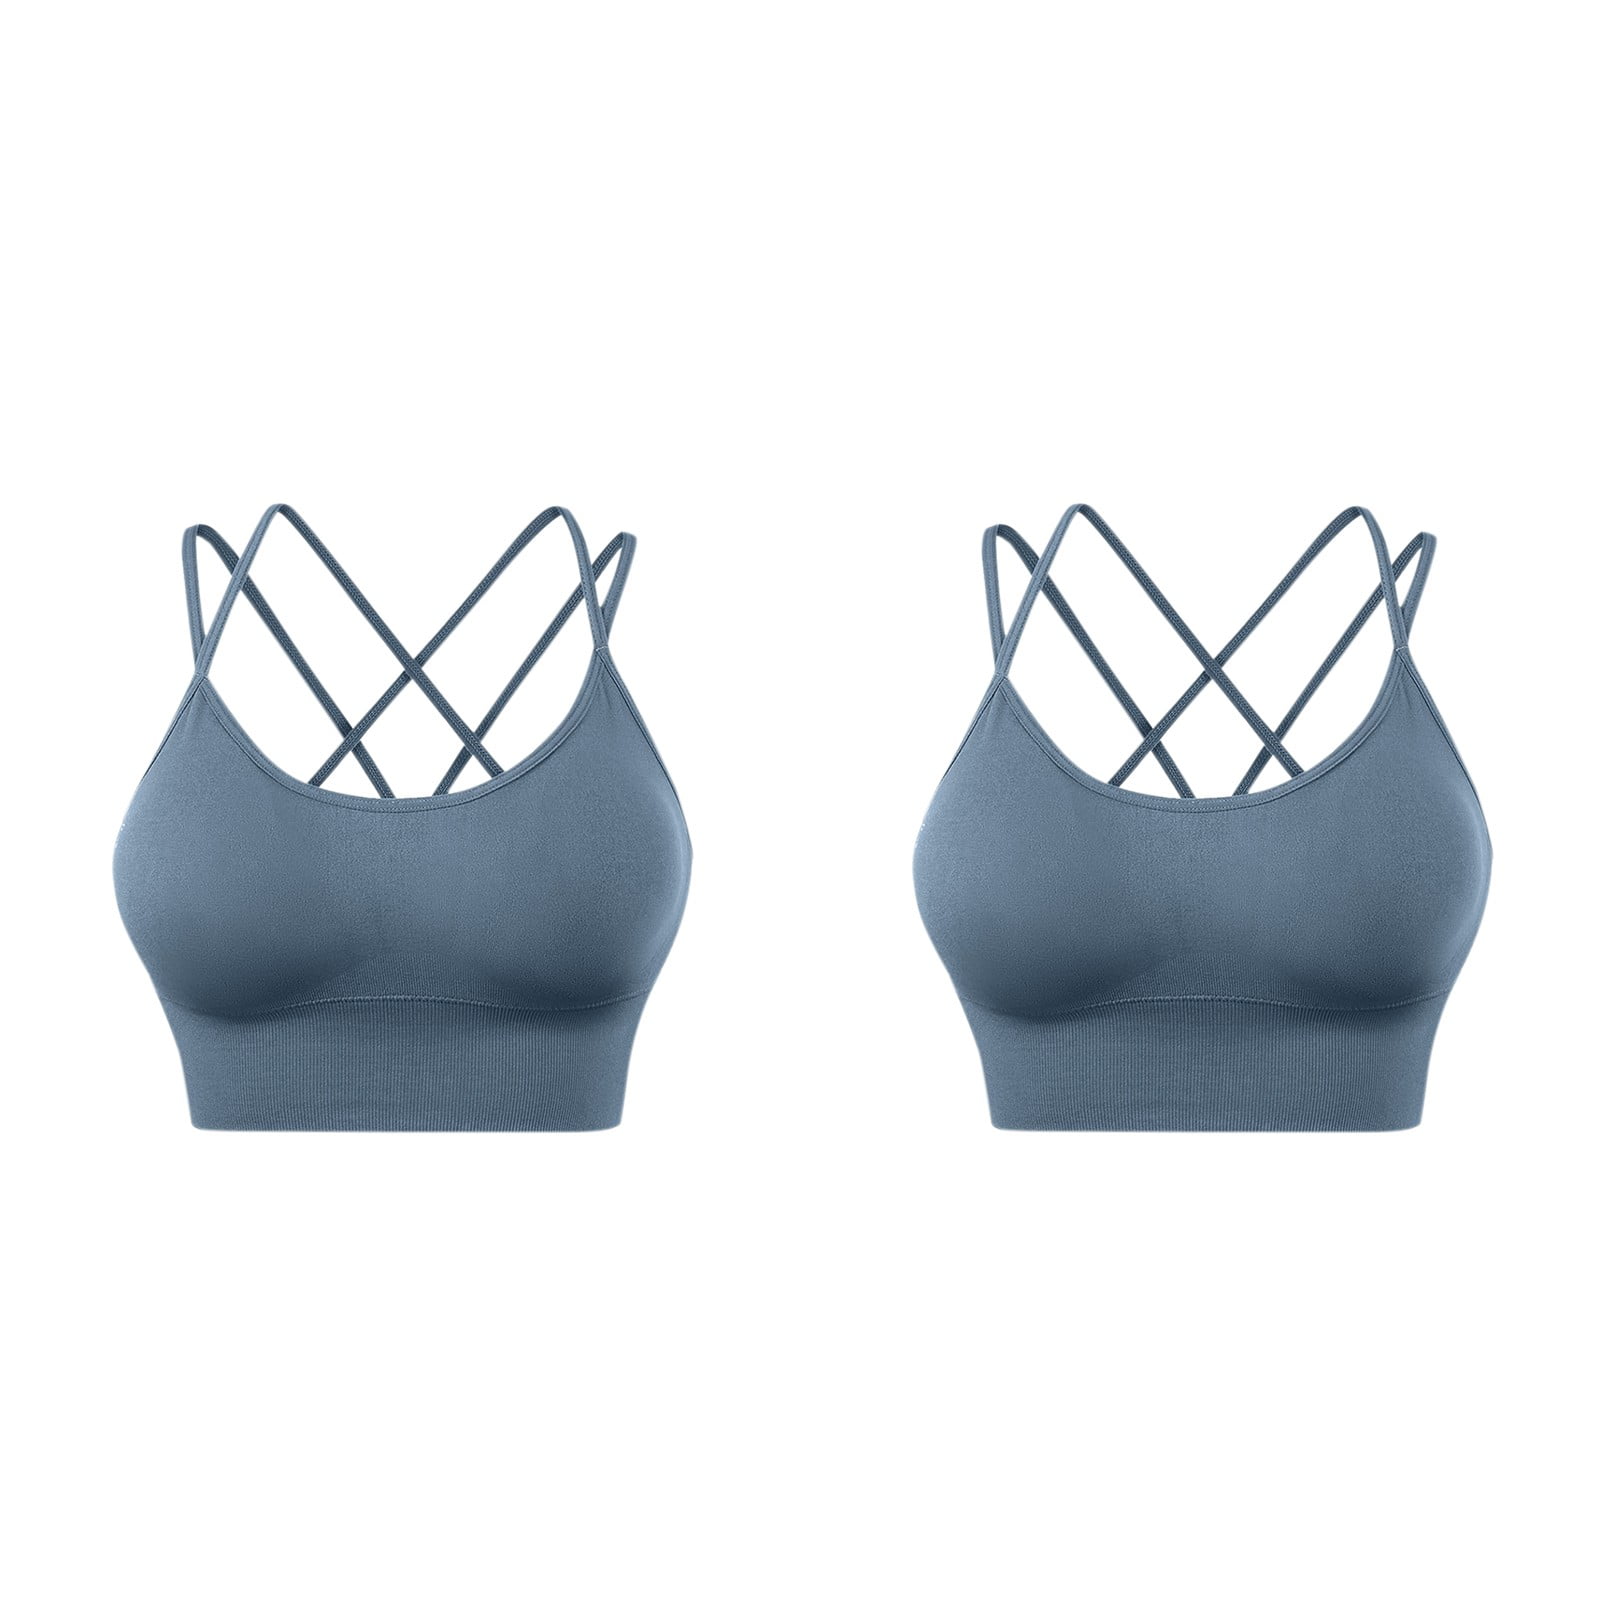 GWAABD Cheap Bras for Women 2PC Womens Back Sport Bras Padded Strappy  Cropped Bras for Yoga Workout Fitness Low Impact Bras 